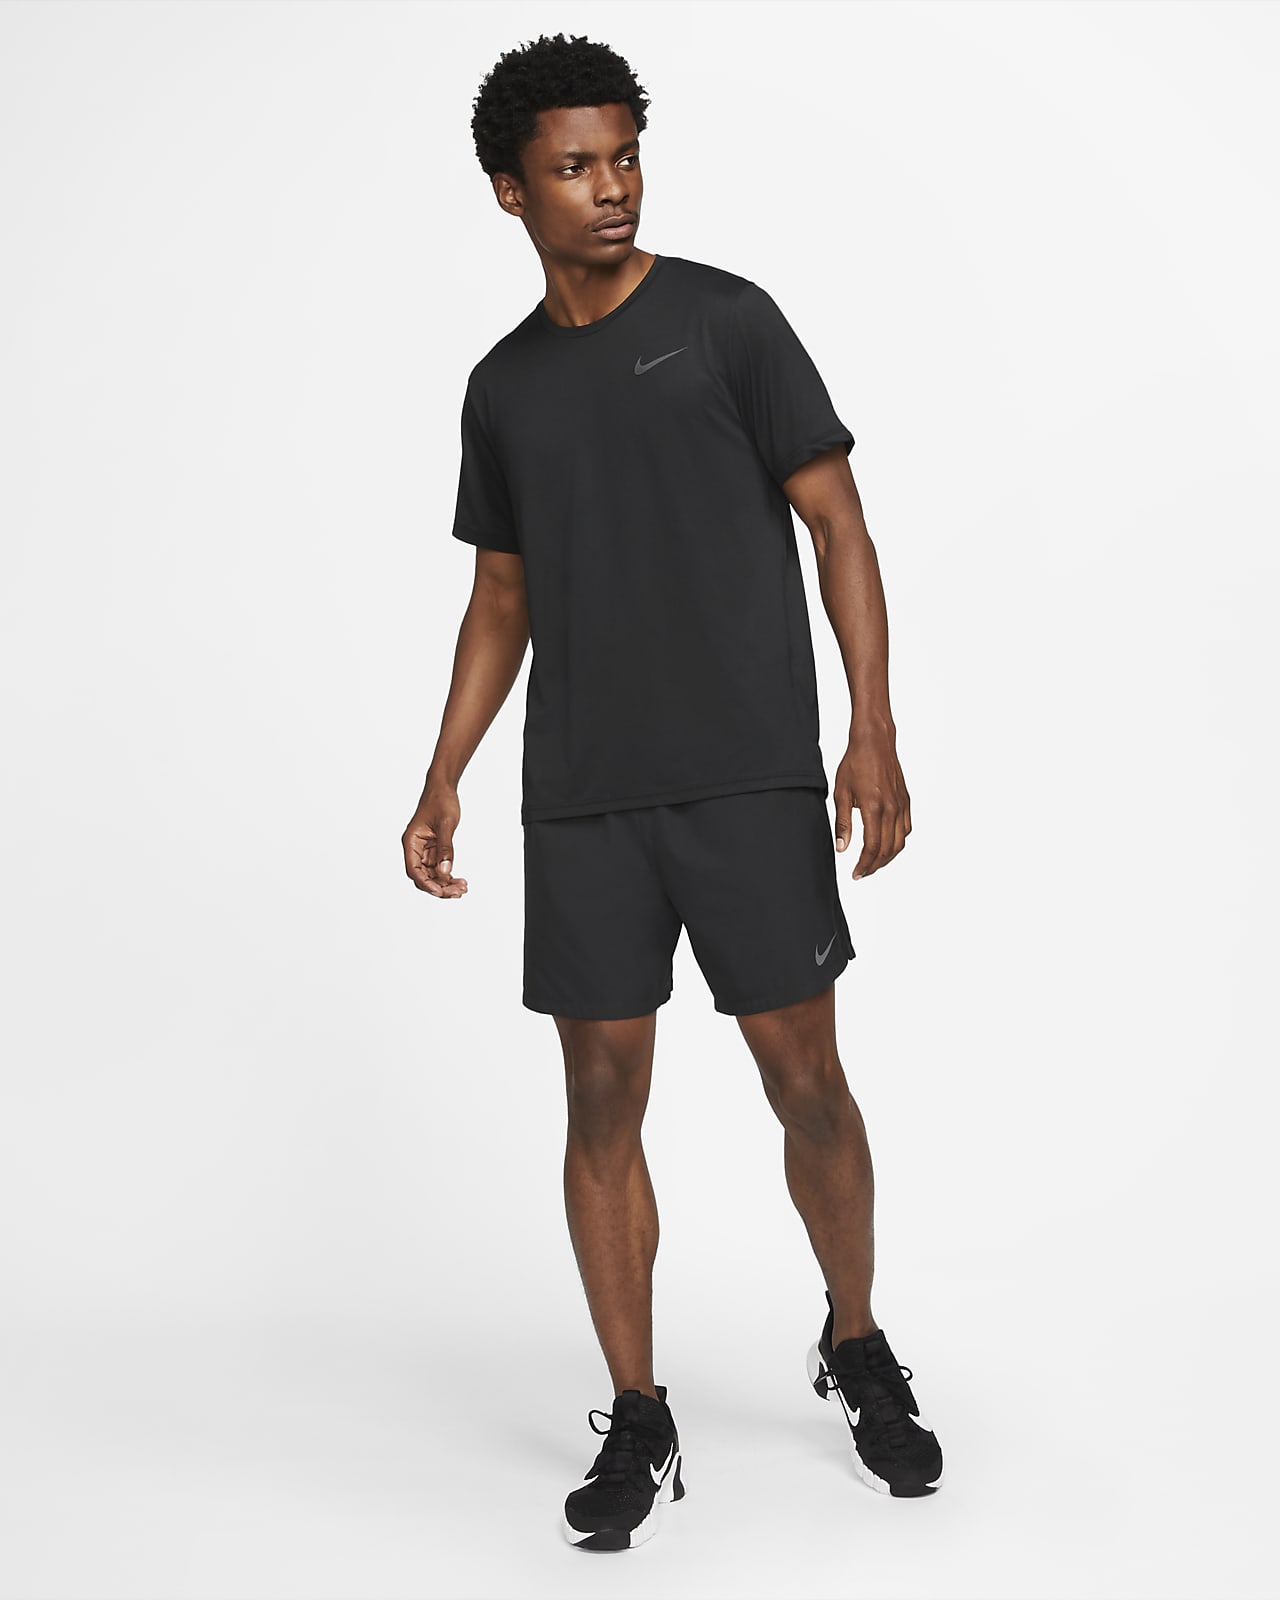 Físico  Sport outfit men, Mens outfits, Gym outfit